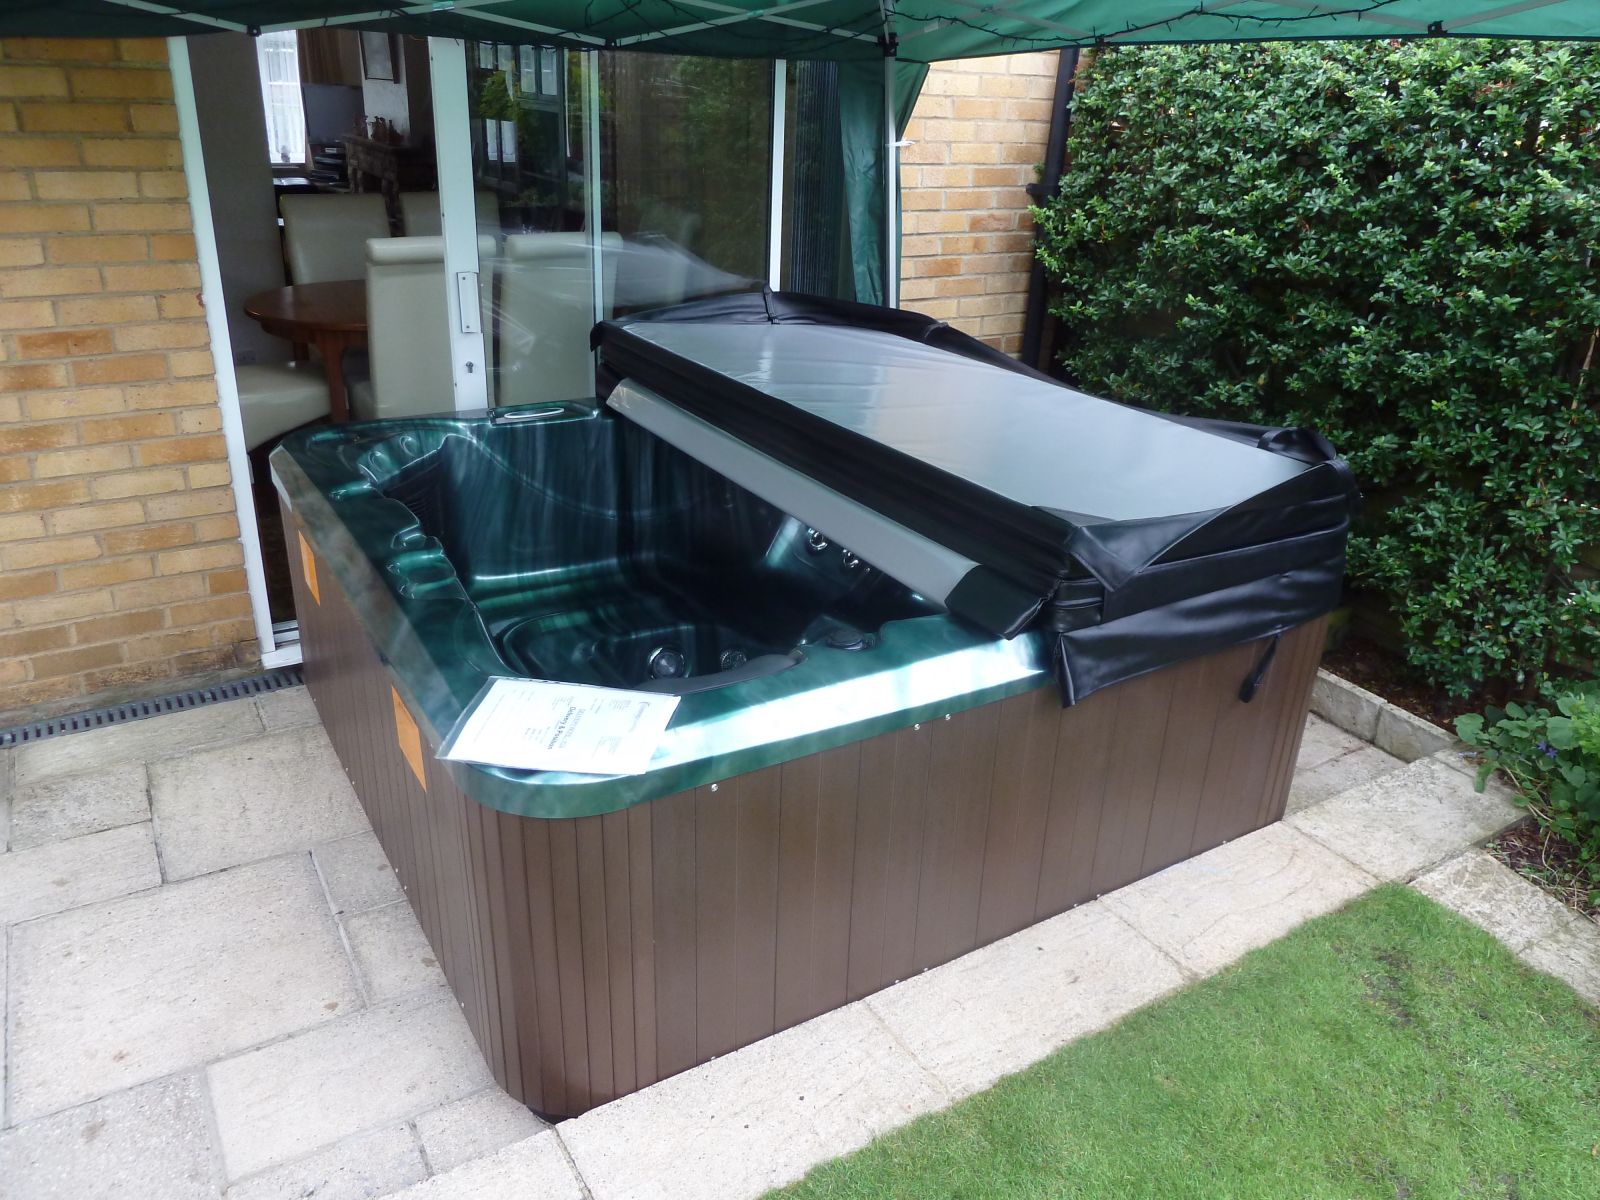 Horizon 5 Seat Plug Play Hot Tub Out For Delivery To